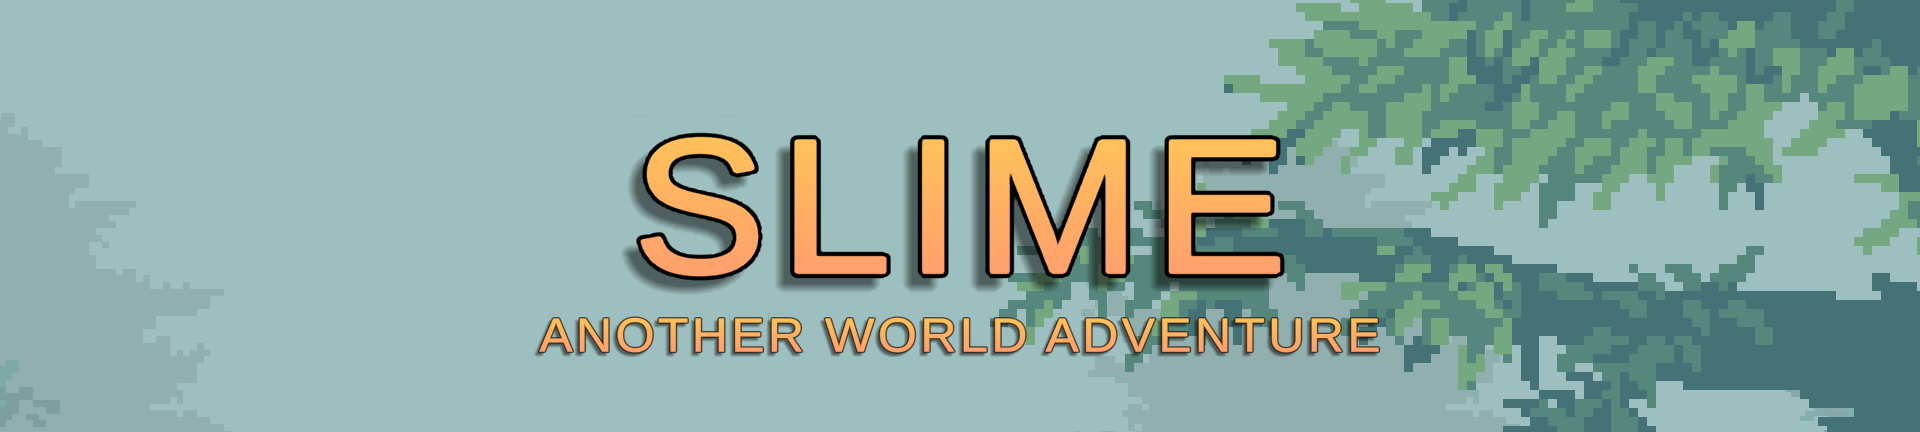 Slime Another World Adventure